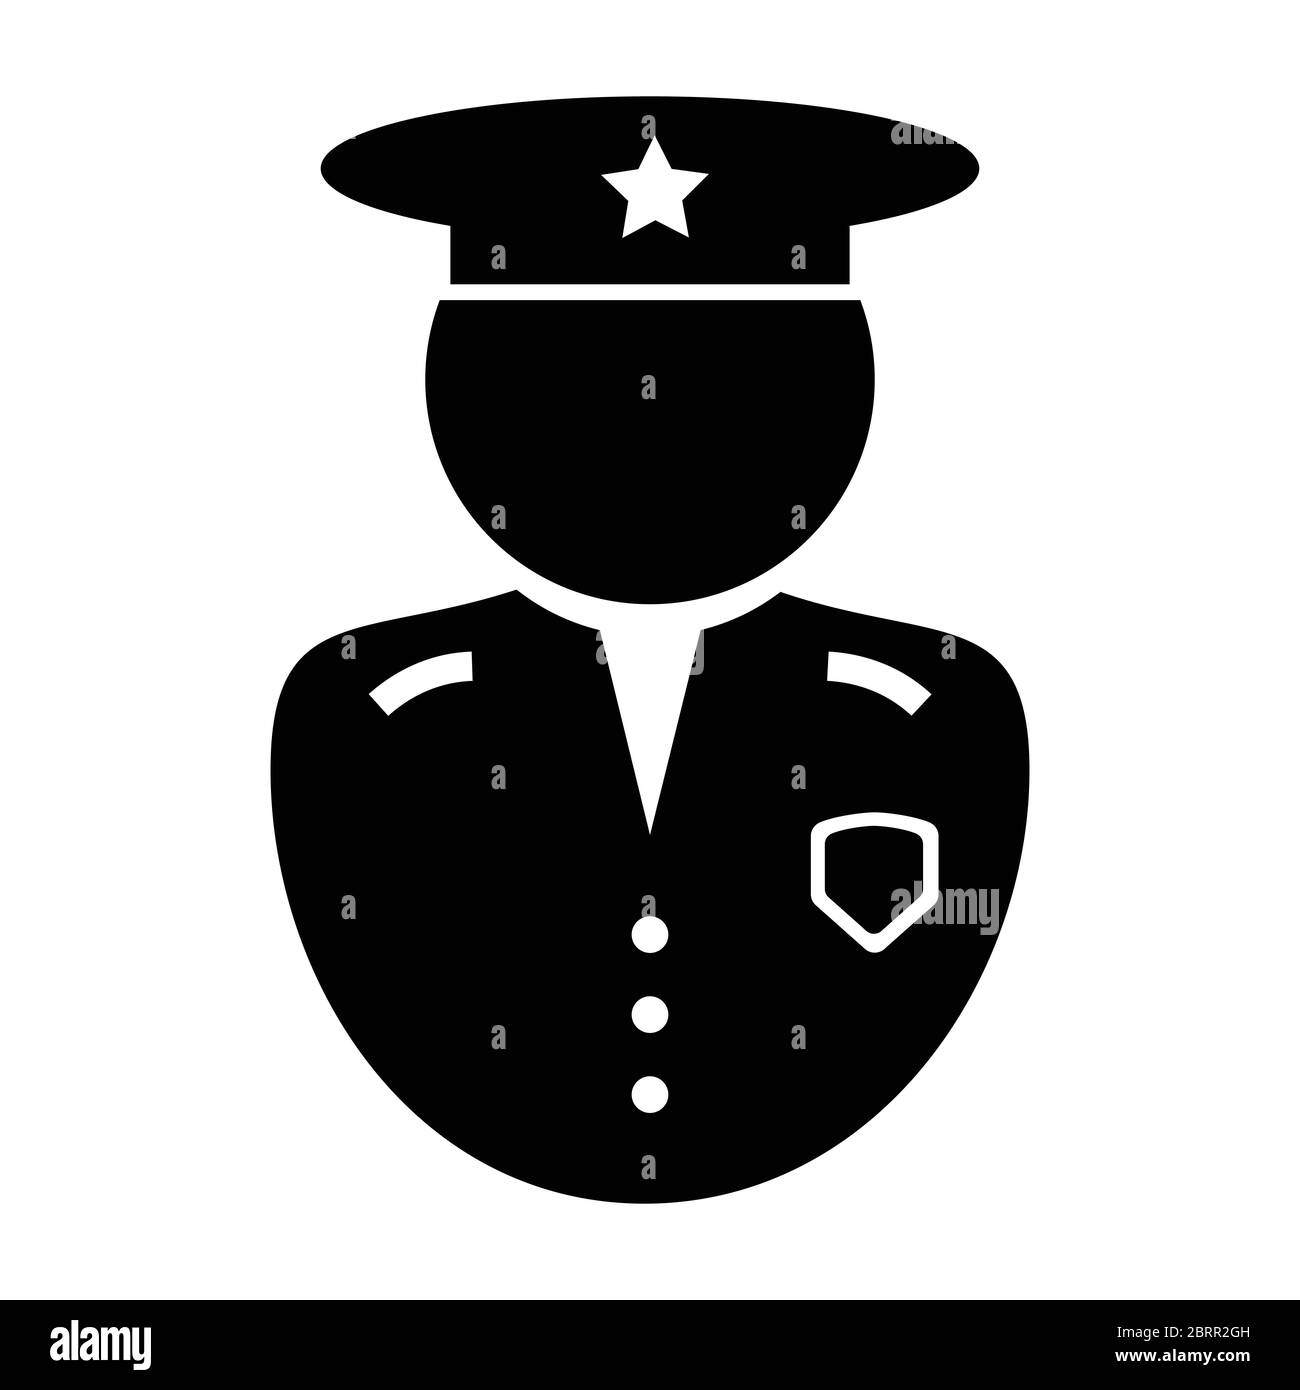 Police Officer Icon. Black and white illustration pictogram icon depicting uniformed law enforcement officer with hat and badge. EPS Vector Stock Vector